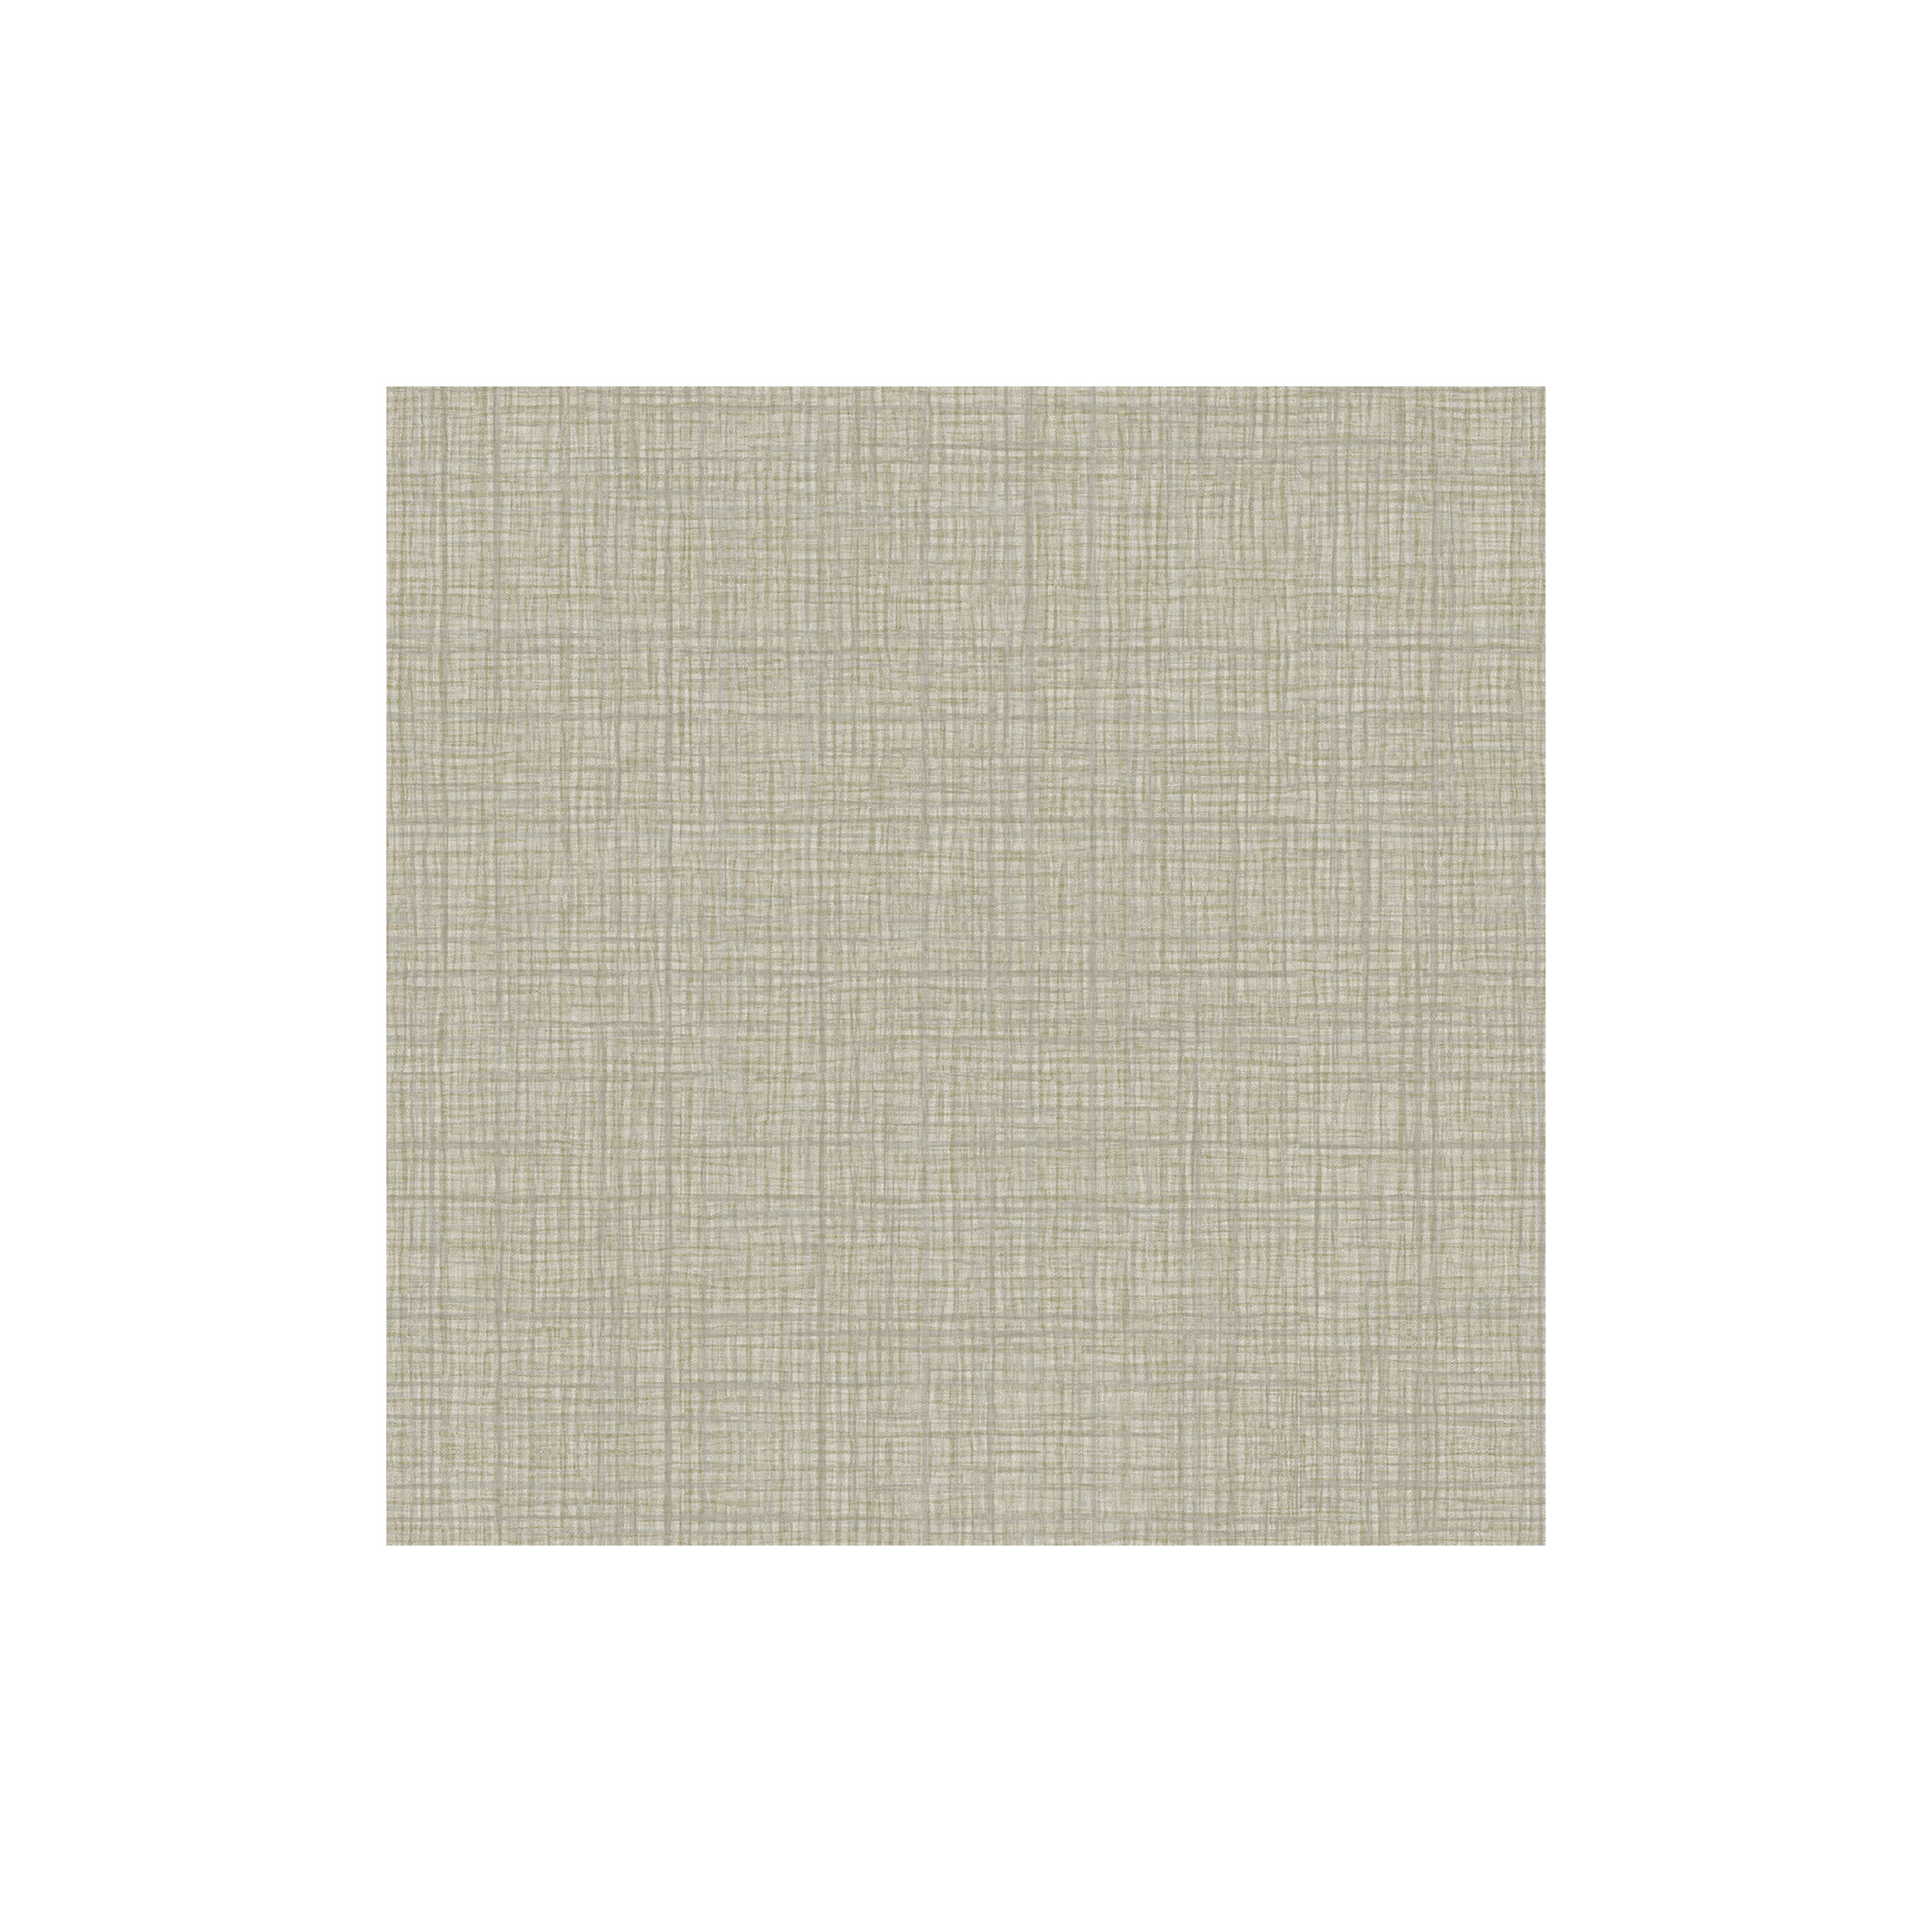 Native Fabric LVT In Linen image number 5